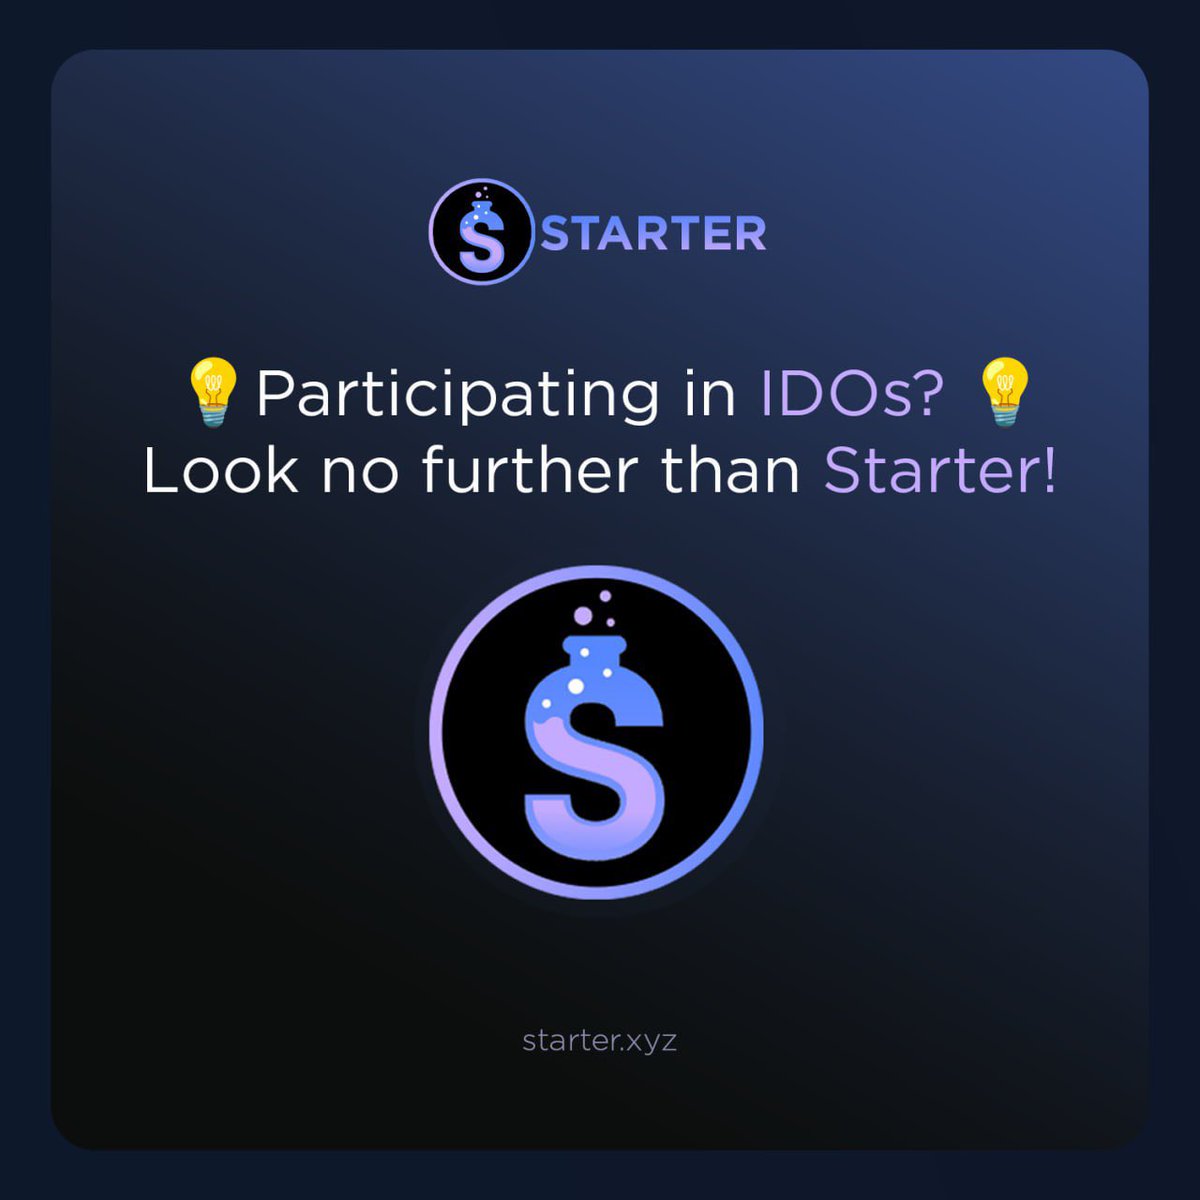 Participating in IDOs? Look no further than Starter! 💡 With #Starter, you gain access to vetted, high-potential projects at an early stage, before they hit other major platforms. Plus, our platform offers a fair and transparent process, ensuring equal opportunities for all…